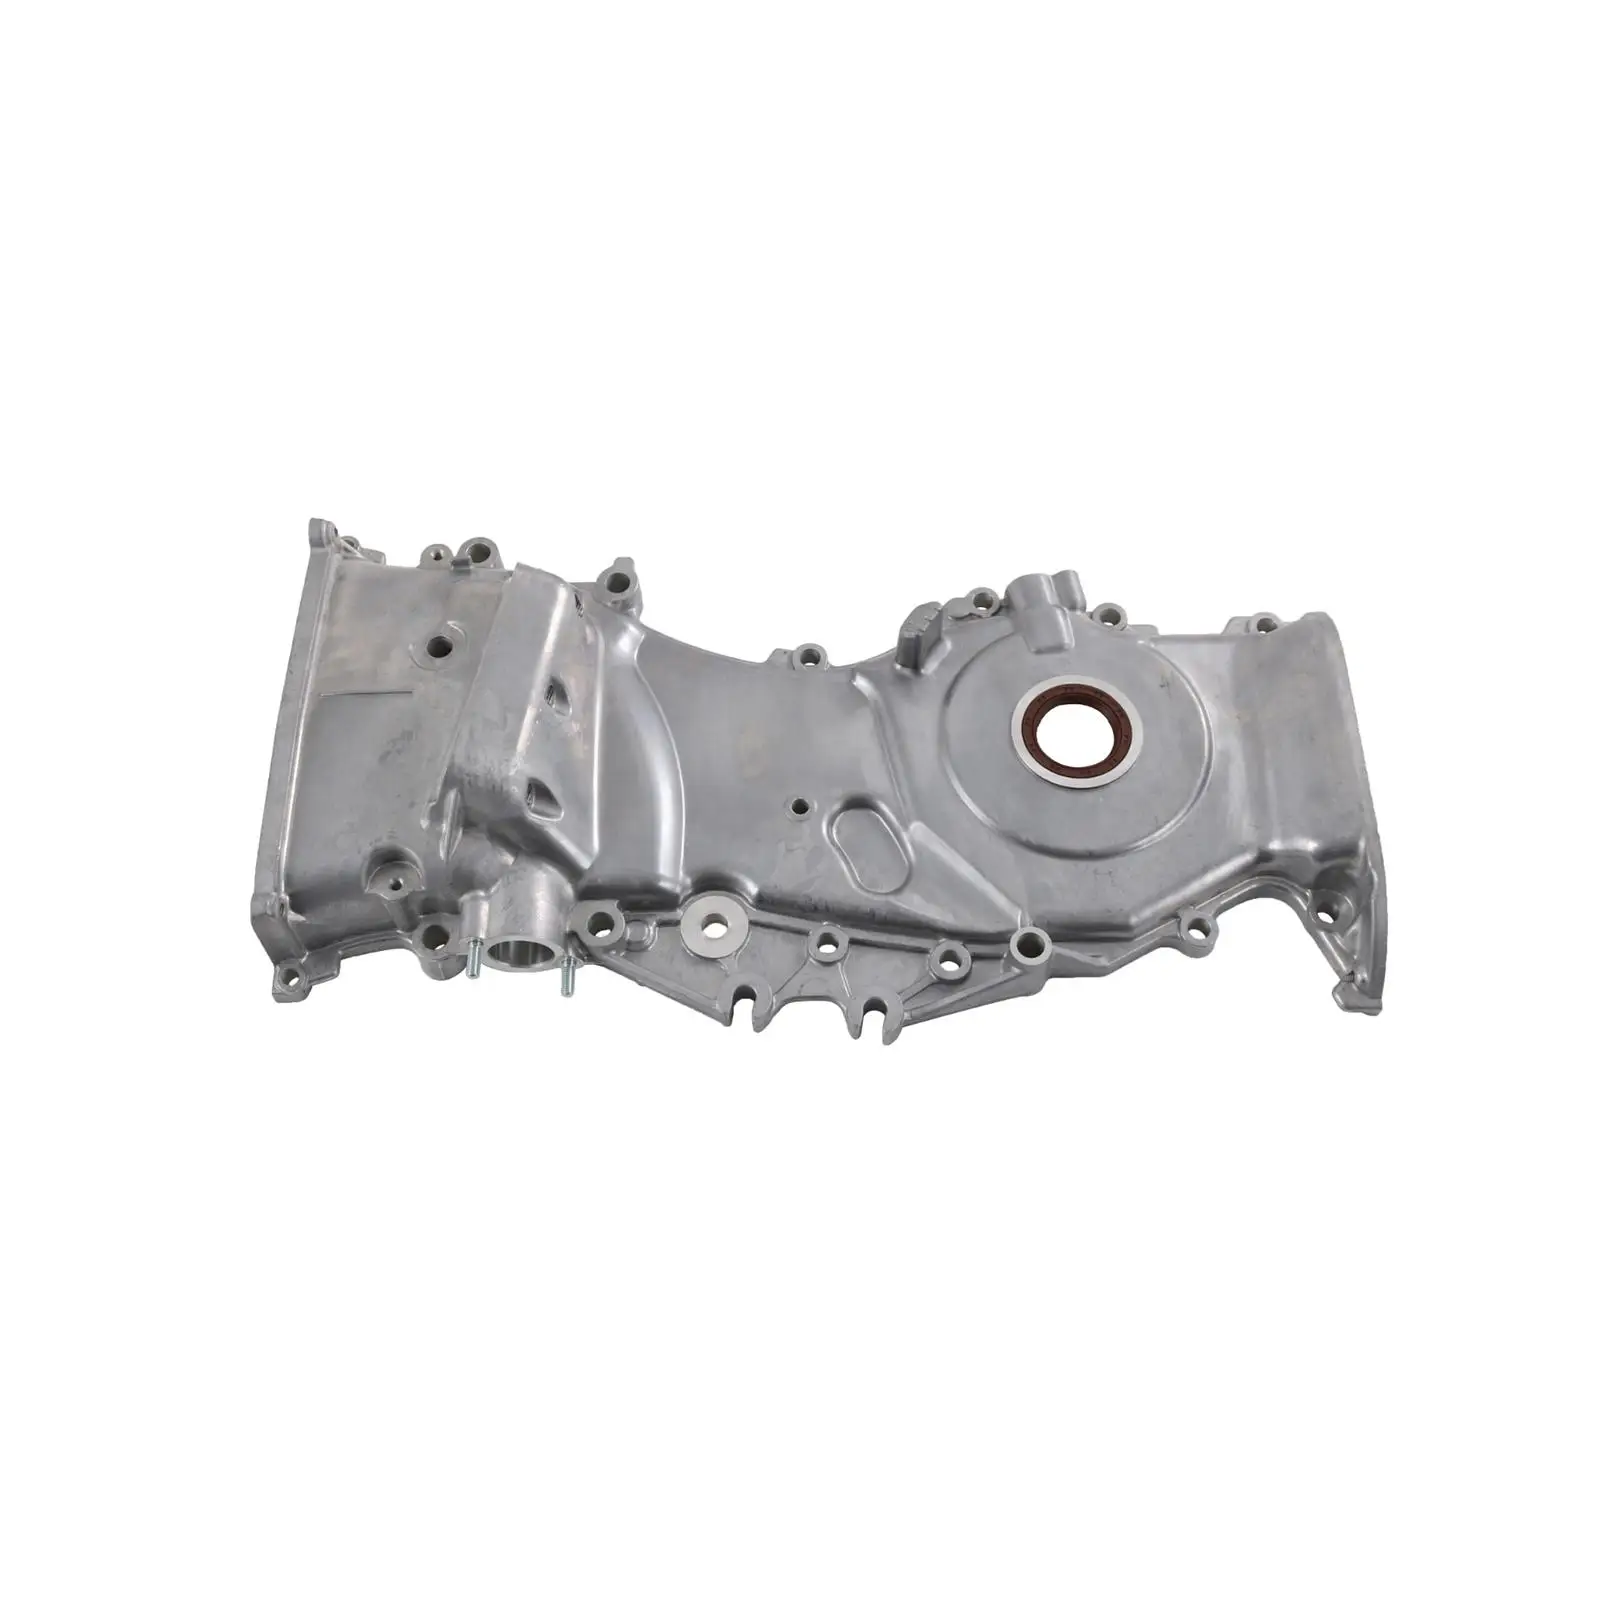 Timing Cover 2azfe 113100H010 for Toyota for camry for highlander Solara Sturdy